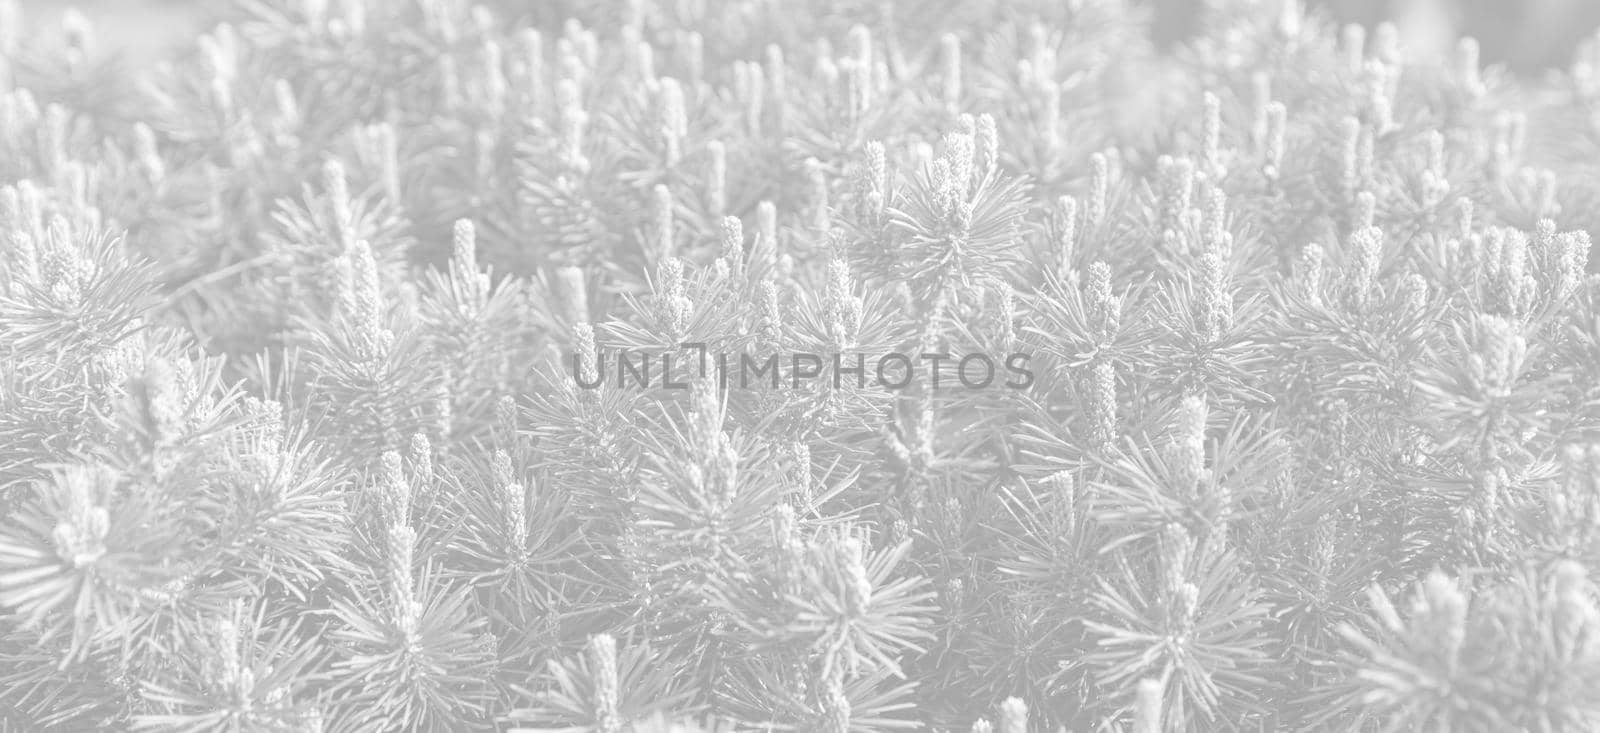 Nature background. Young pine branch by palinchak